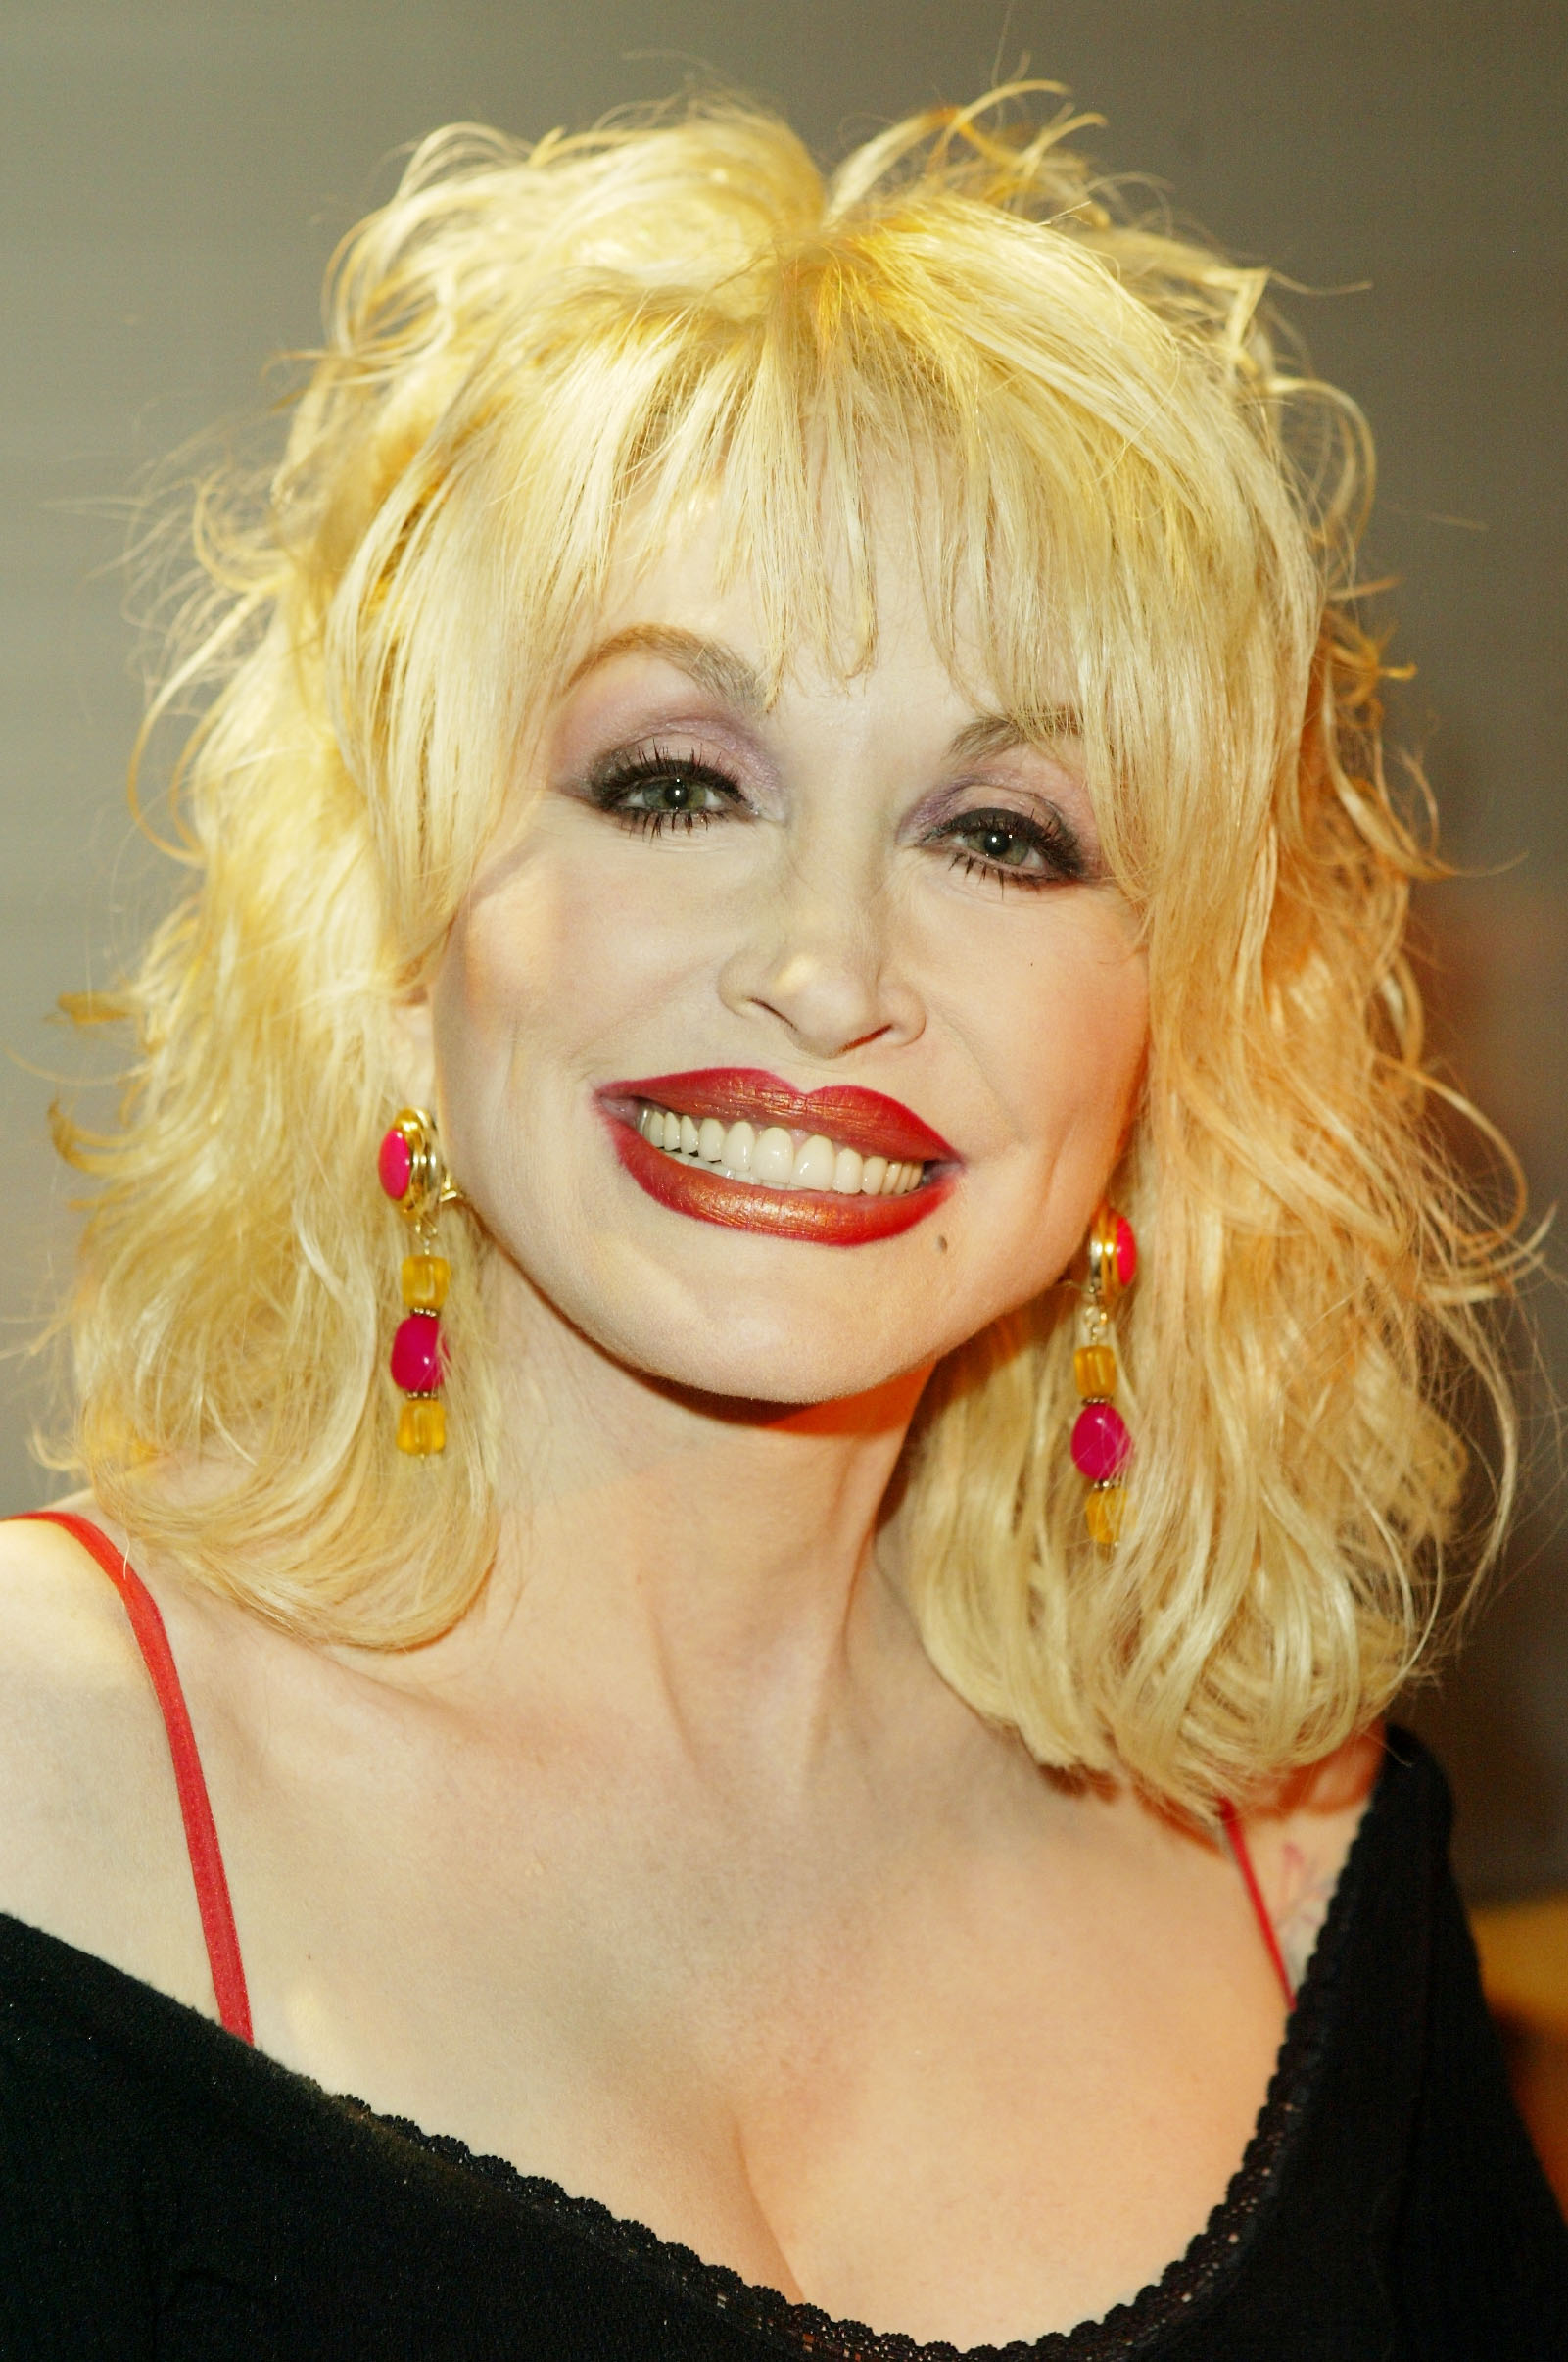 Dolly Parton poses at the Distinctive Assets "Women in Rock" talent gift lounge backstage at the Kodak Theatre in Hollywood, California, on September 29, 2003. | Source: Getty Images